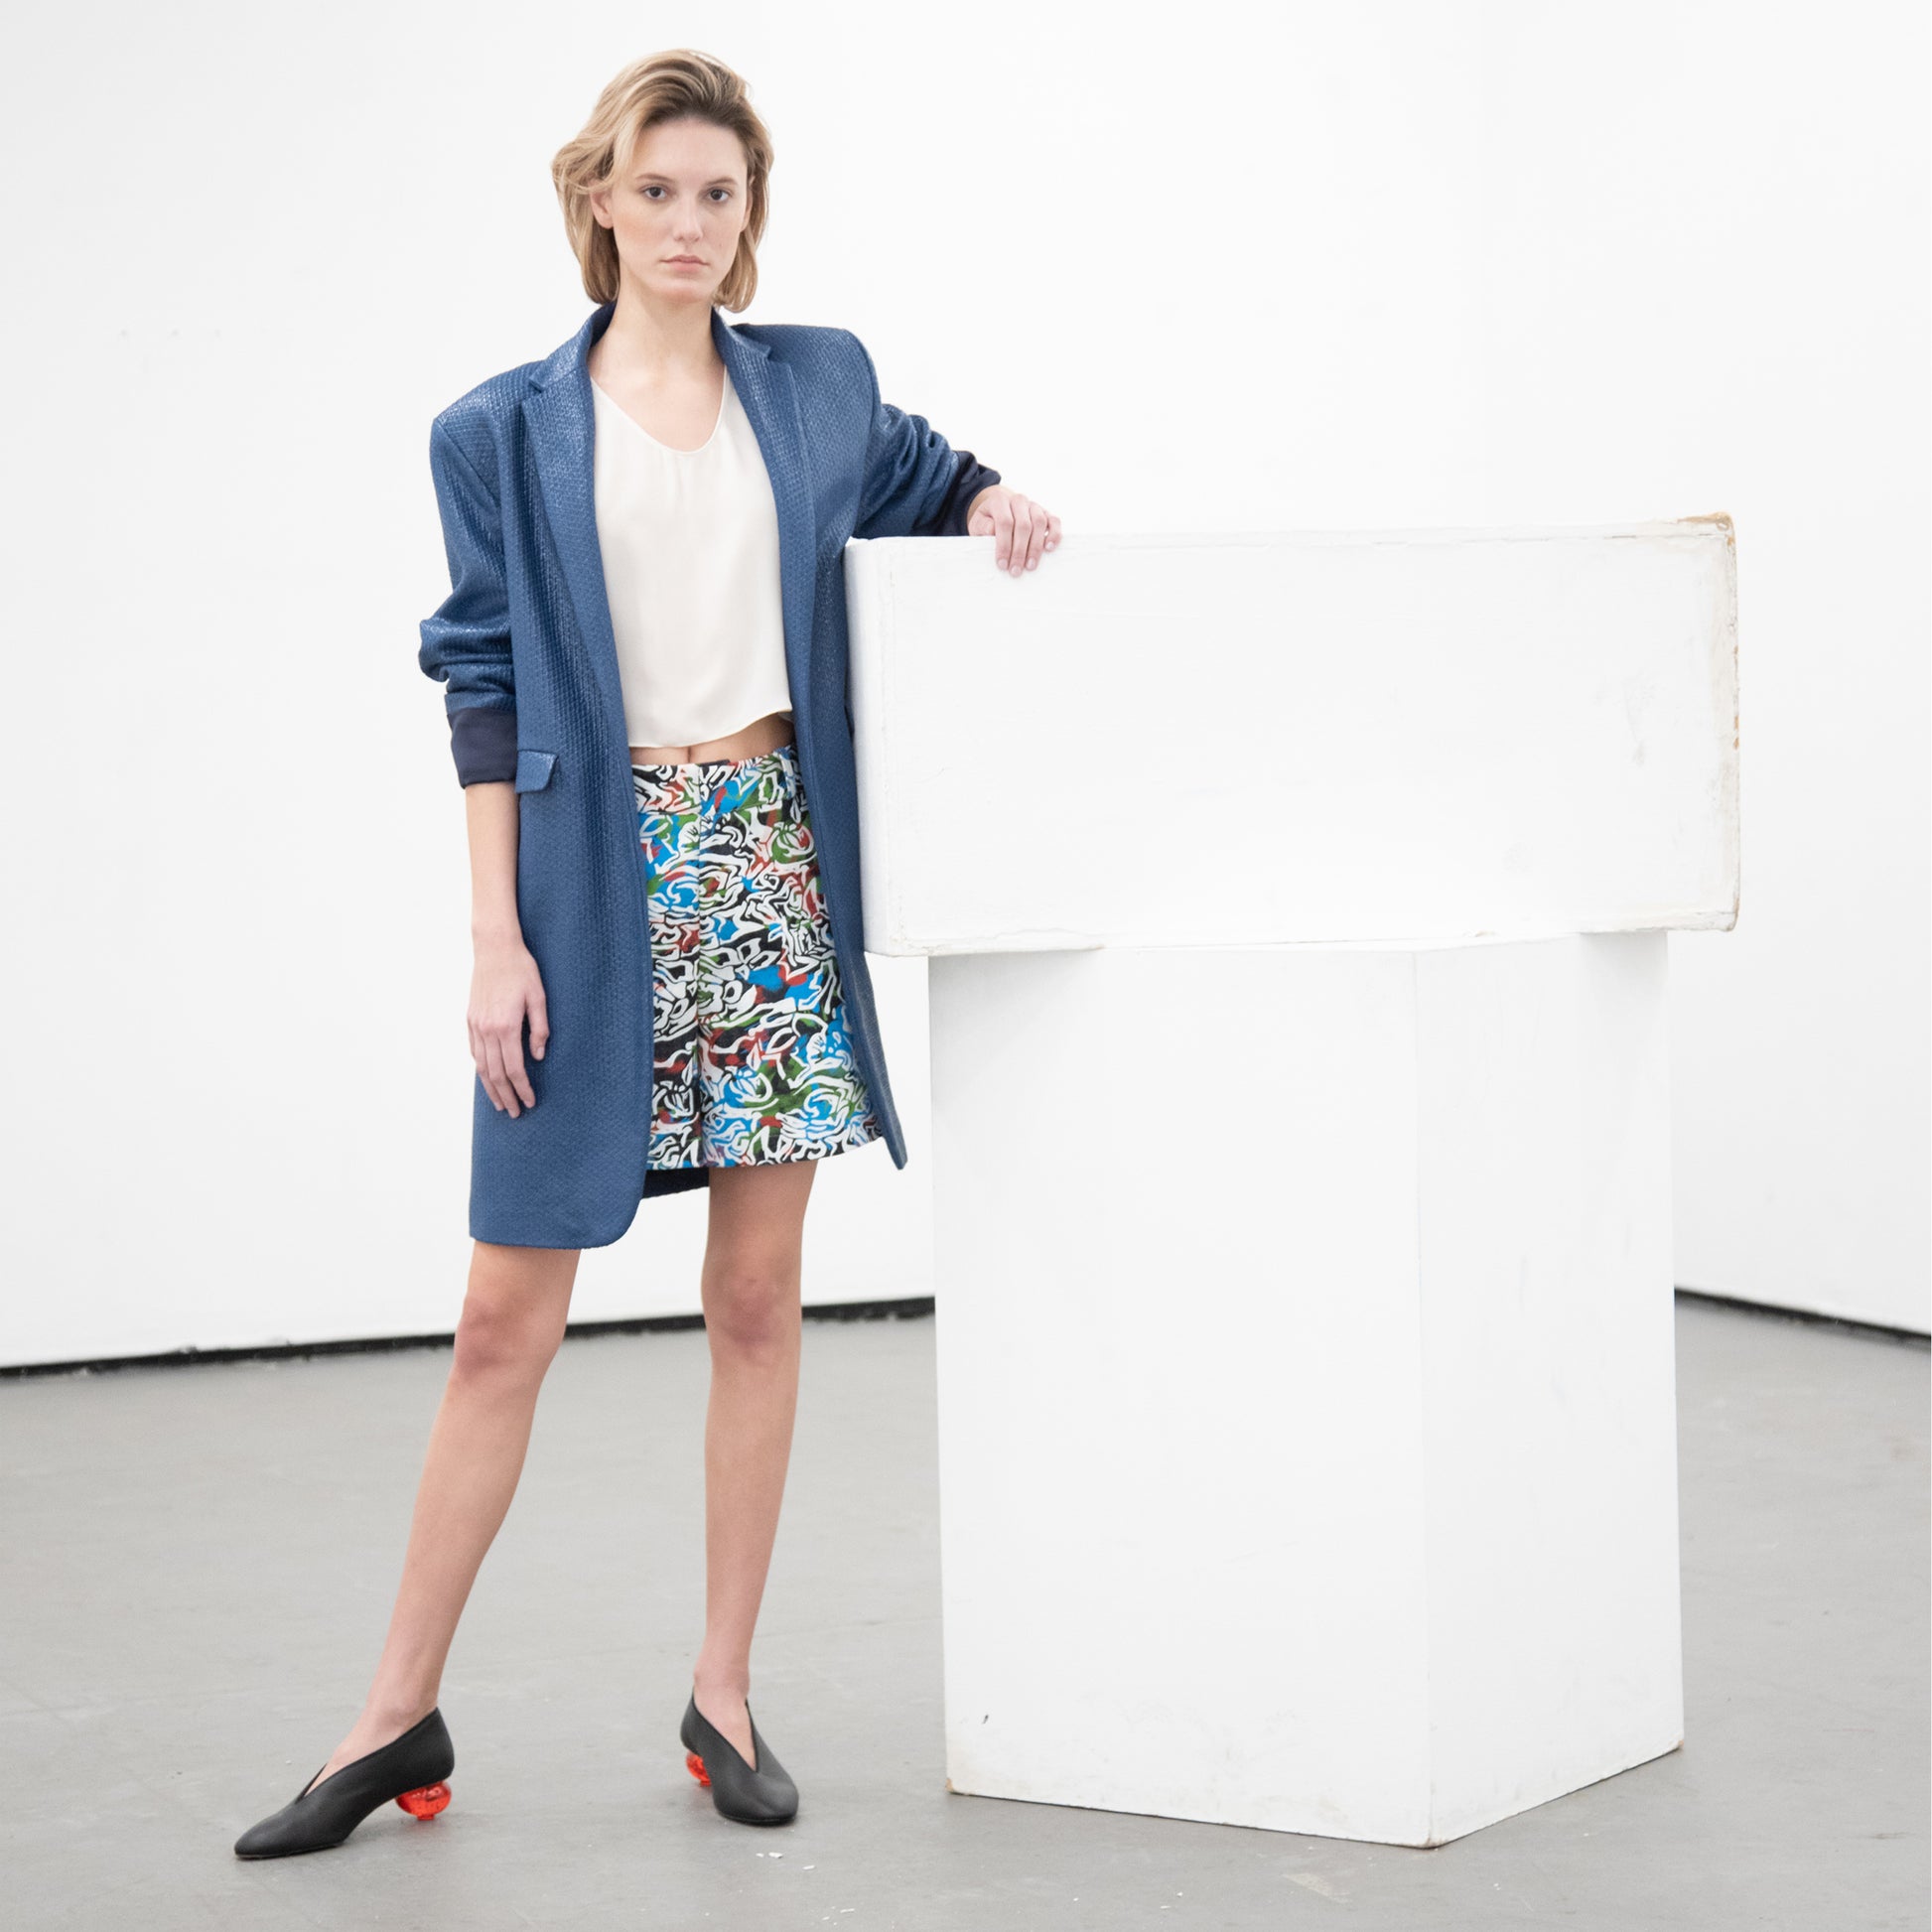 Woman wearing an open style blue blazer cut in a long boyfriend style look over a white shirt and floral shorts'